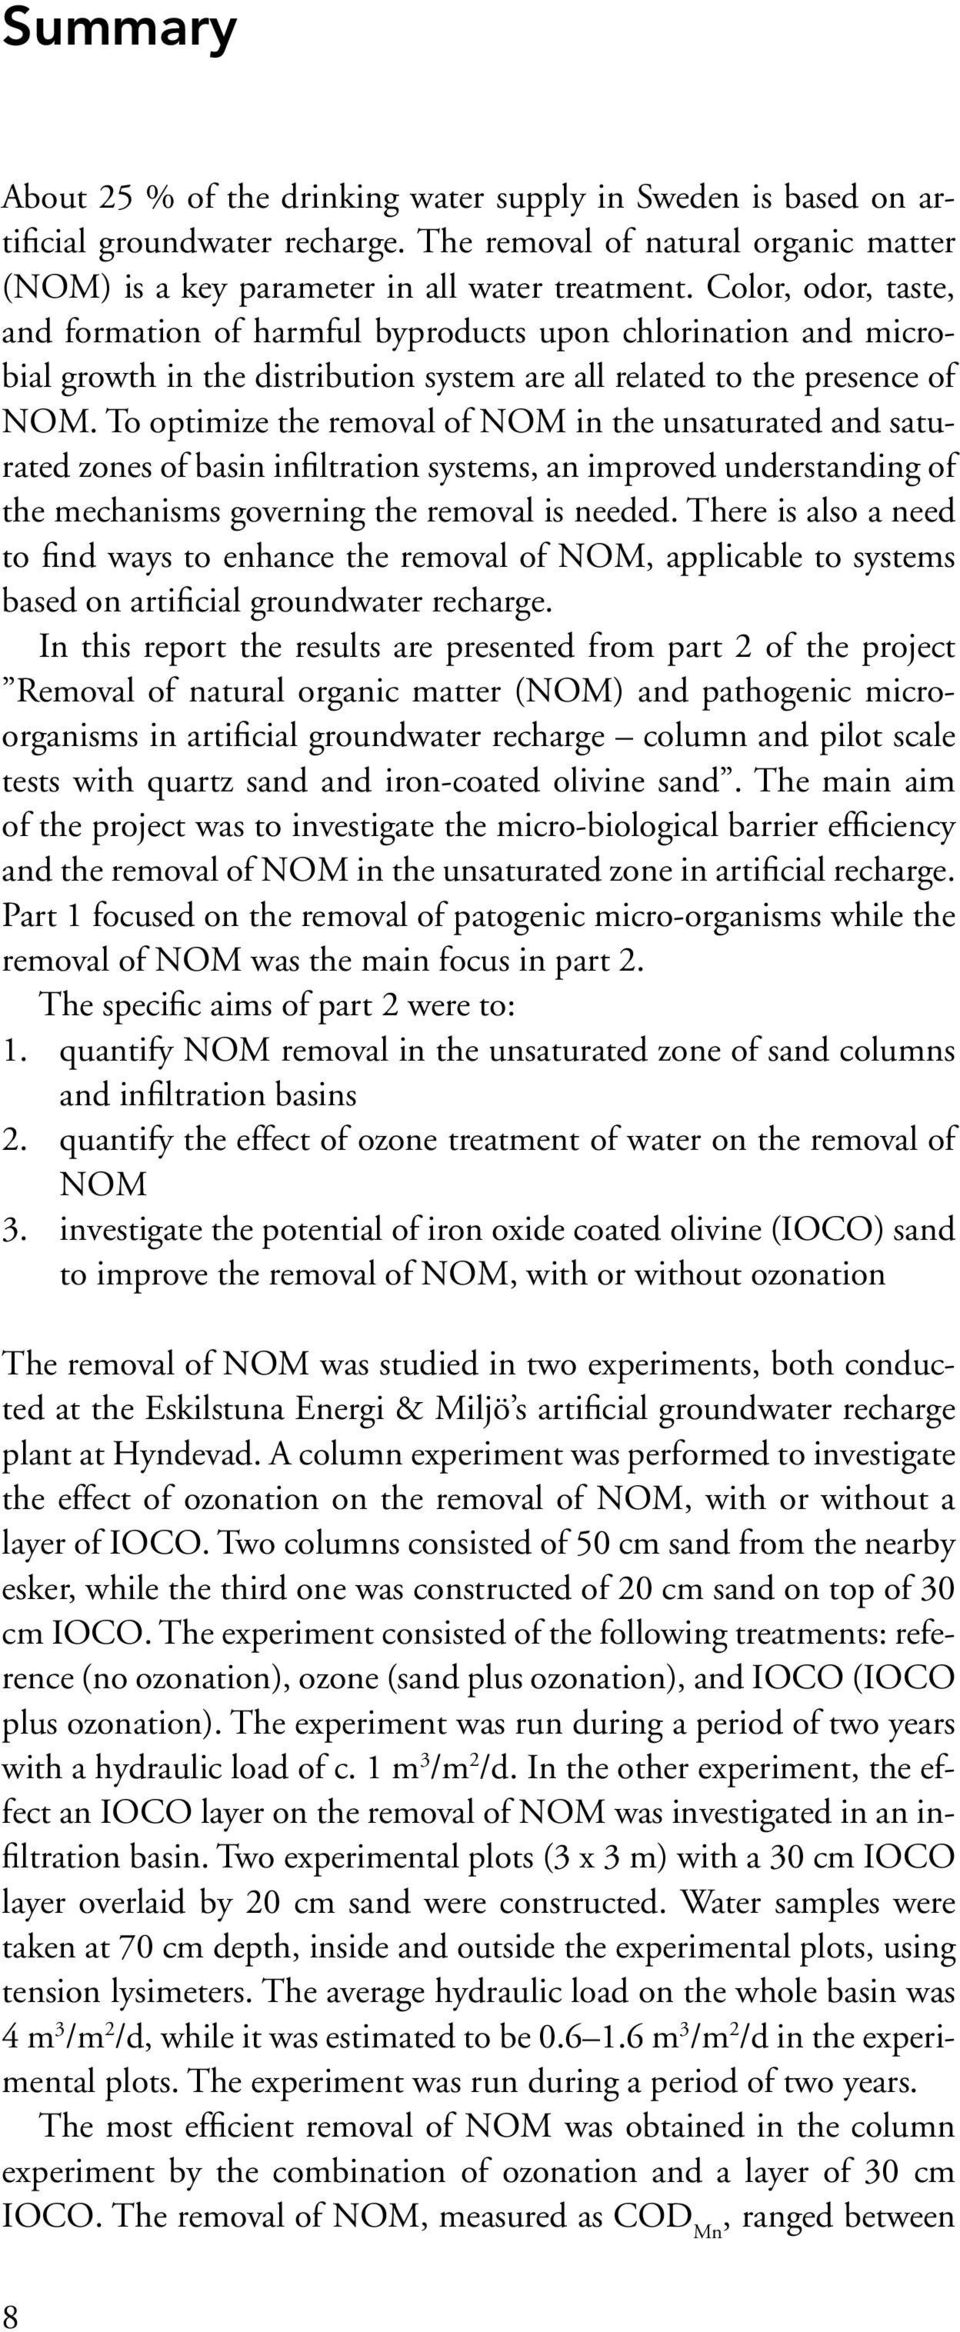 To optimize the removal of NOM in the unsaturated and saturated zones of basin infiltration systems, an improved understanding of the mechanisms governing the removal is needed.